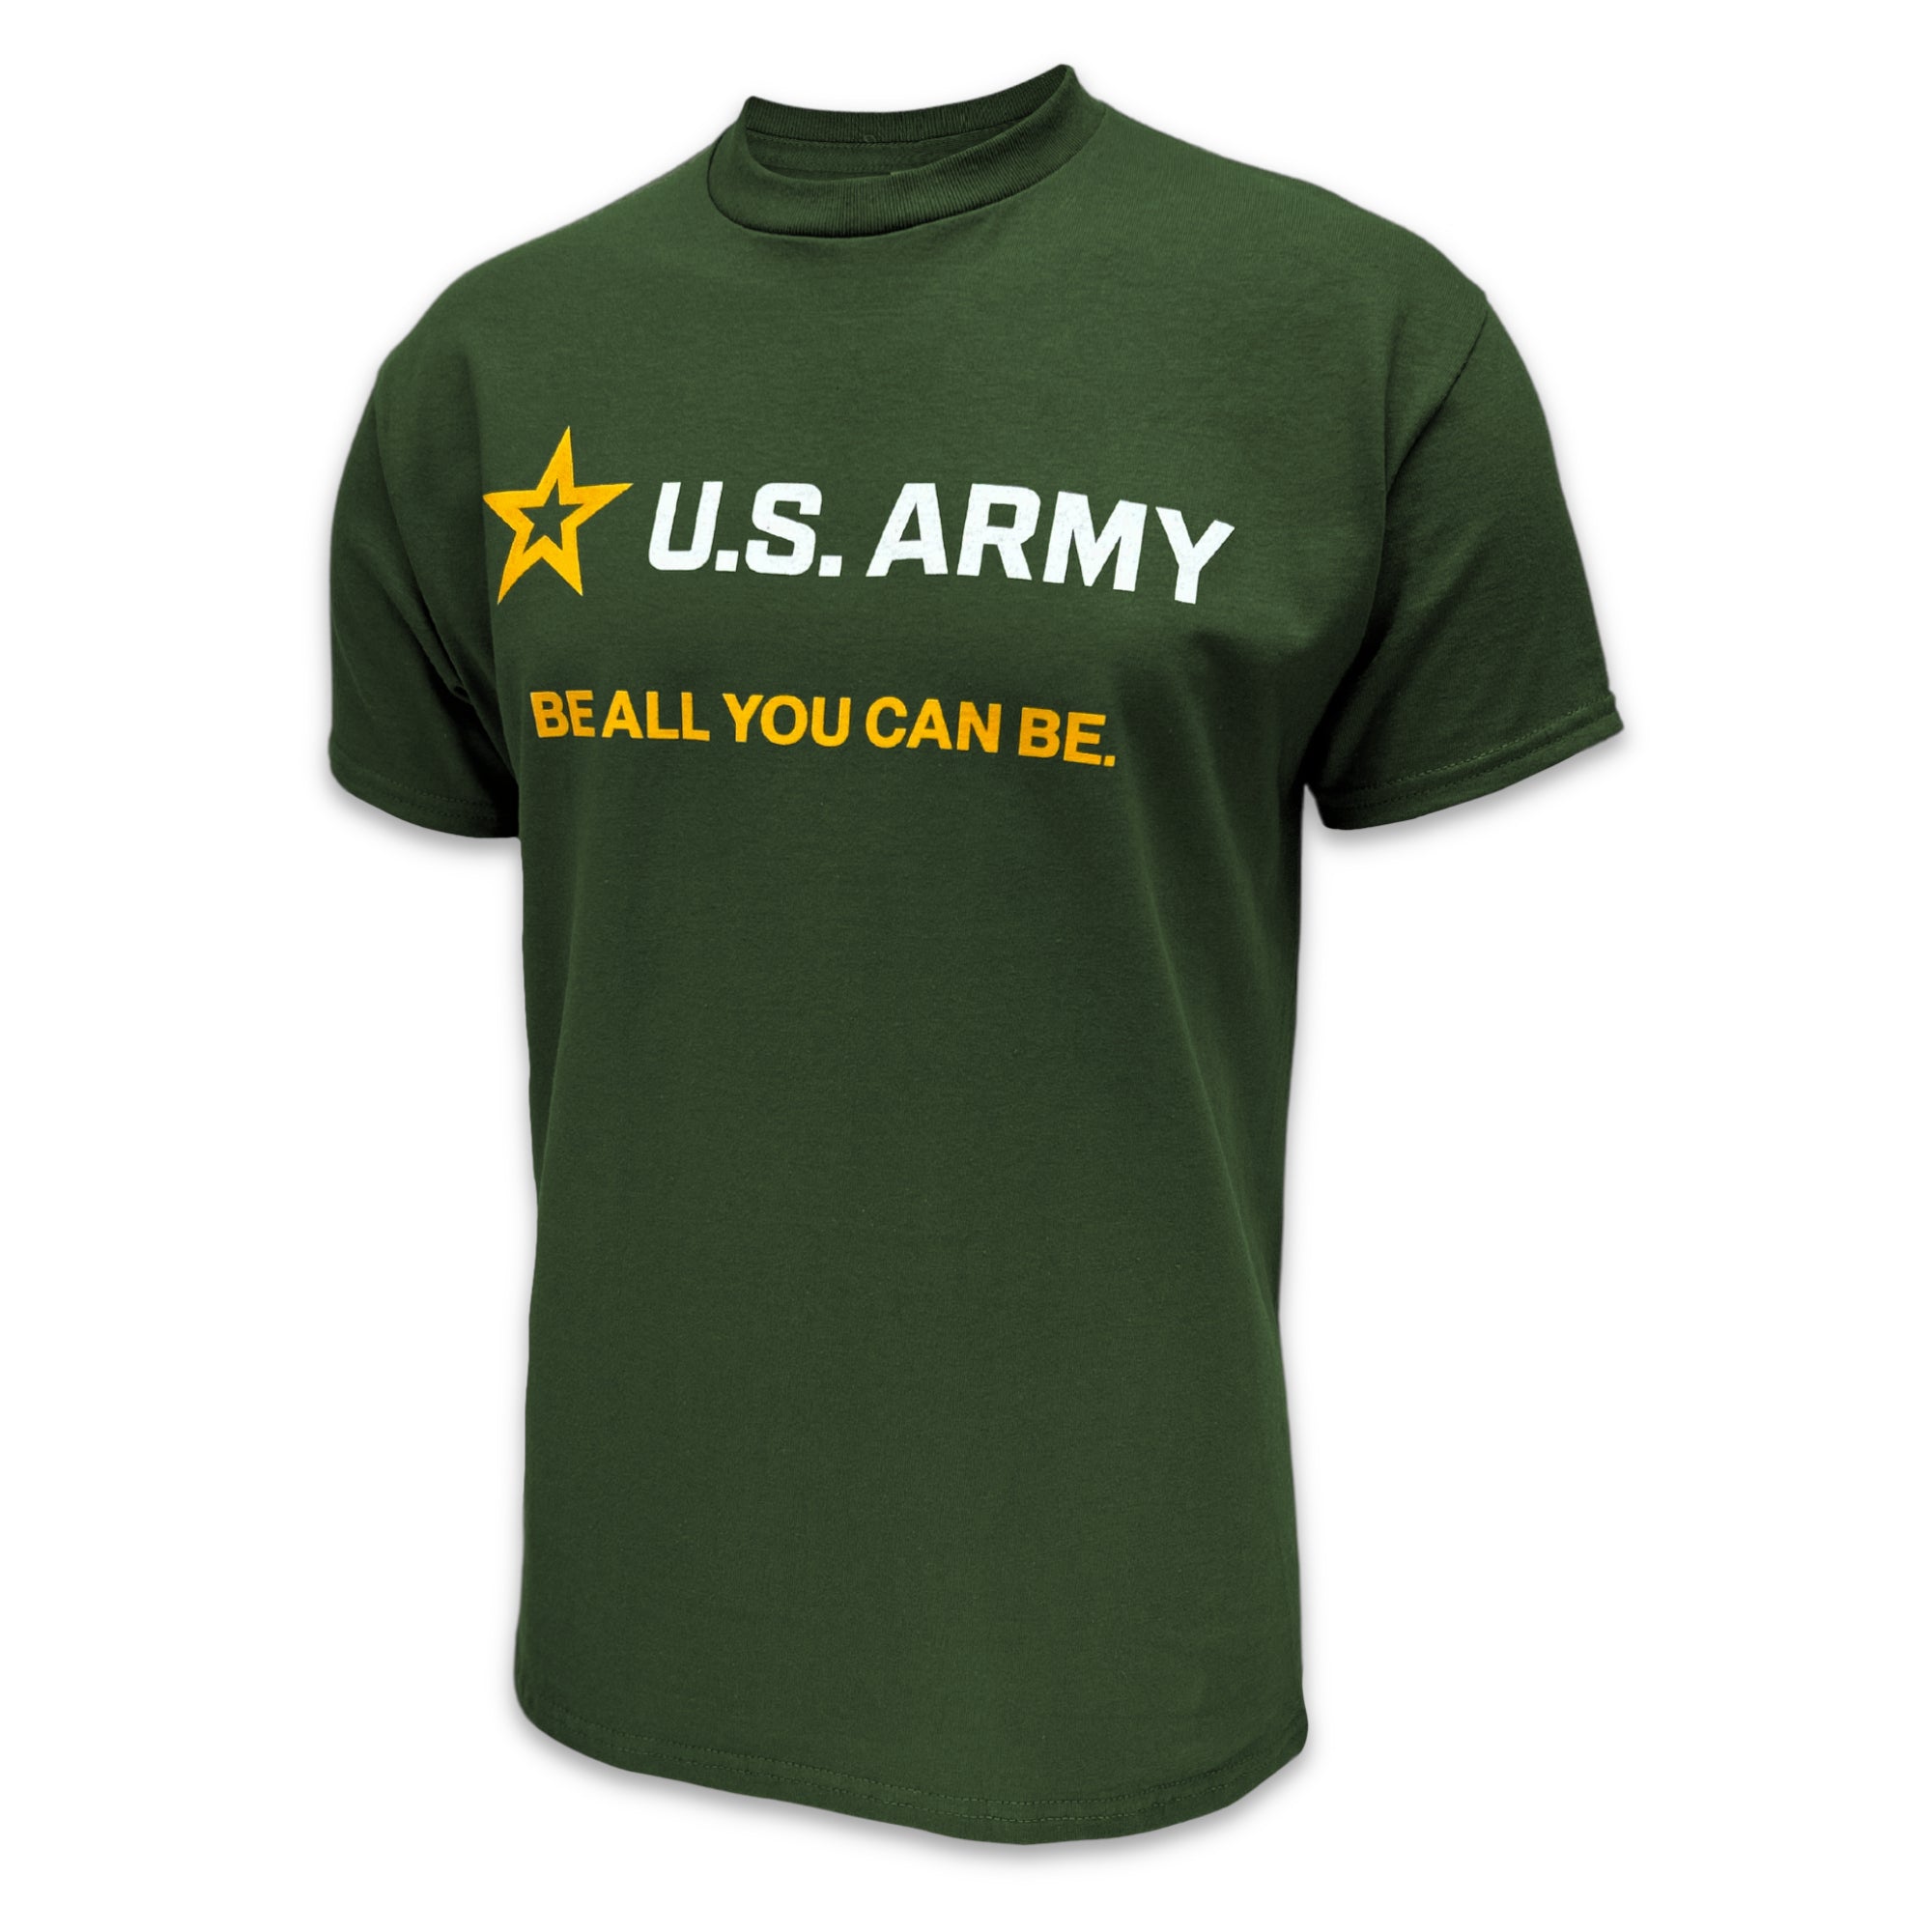 U.S. Army Be All You Can Be T-Shirt (OD Green)